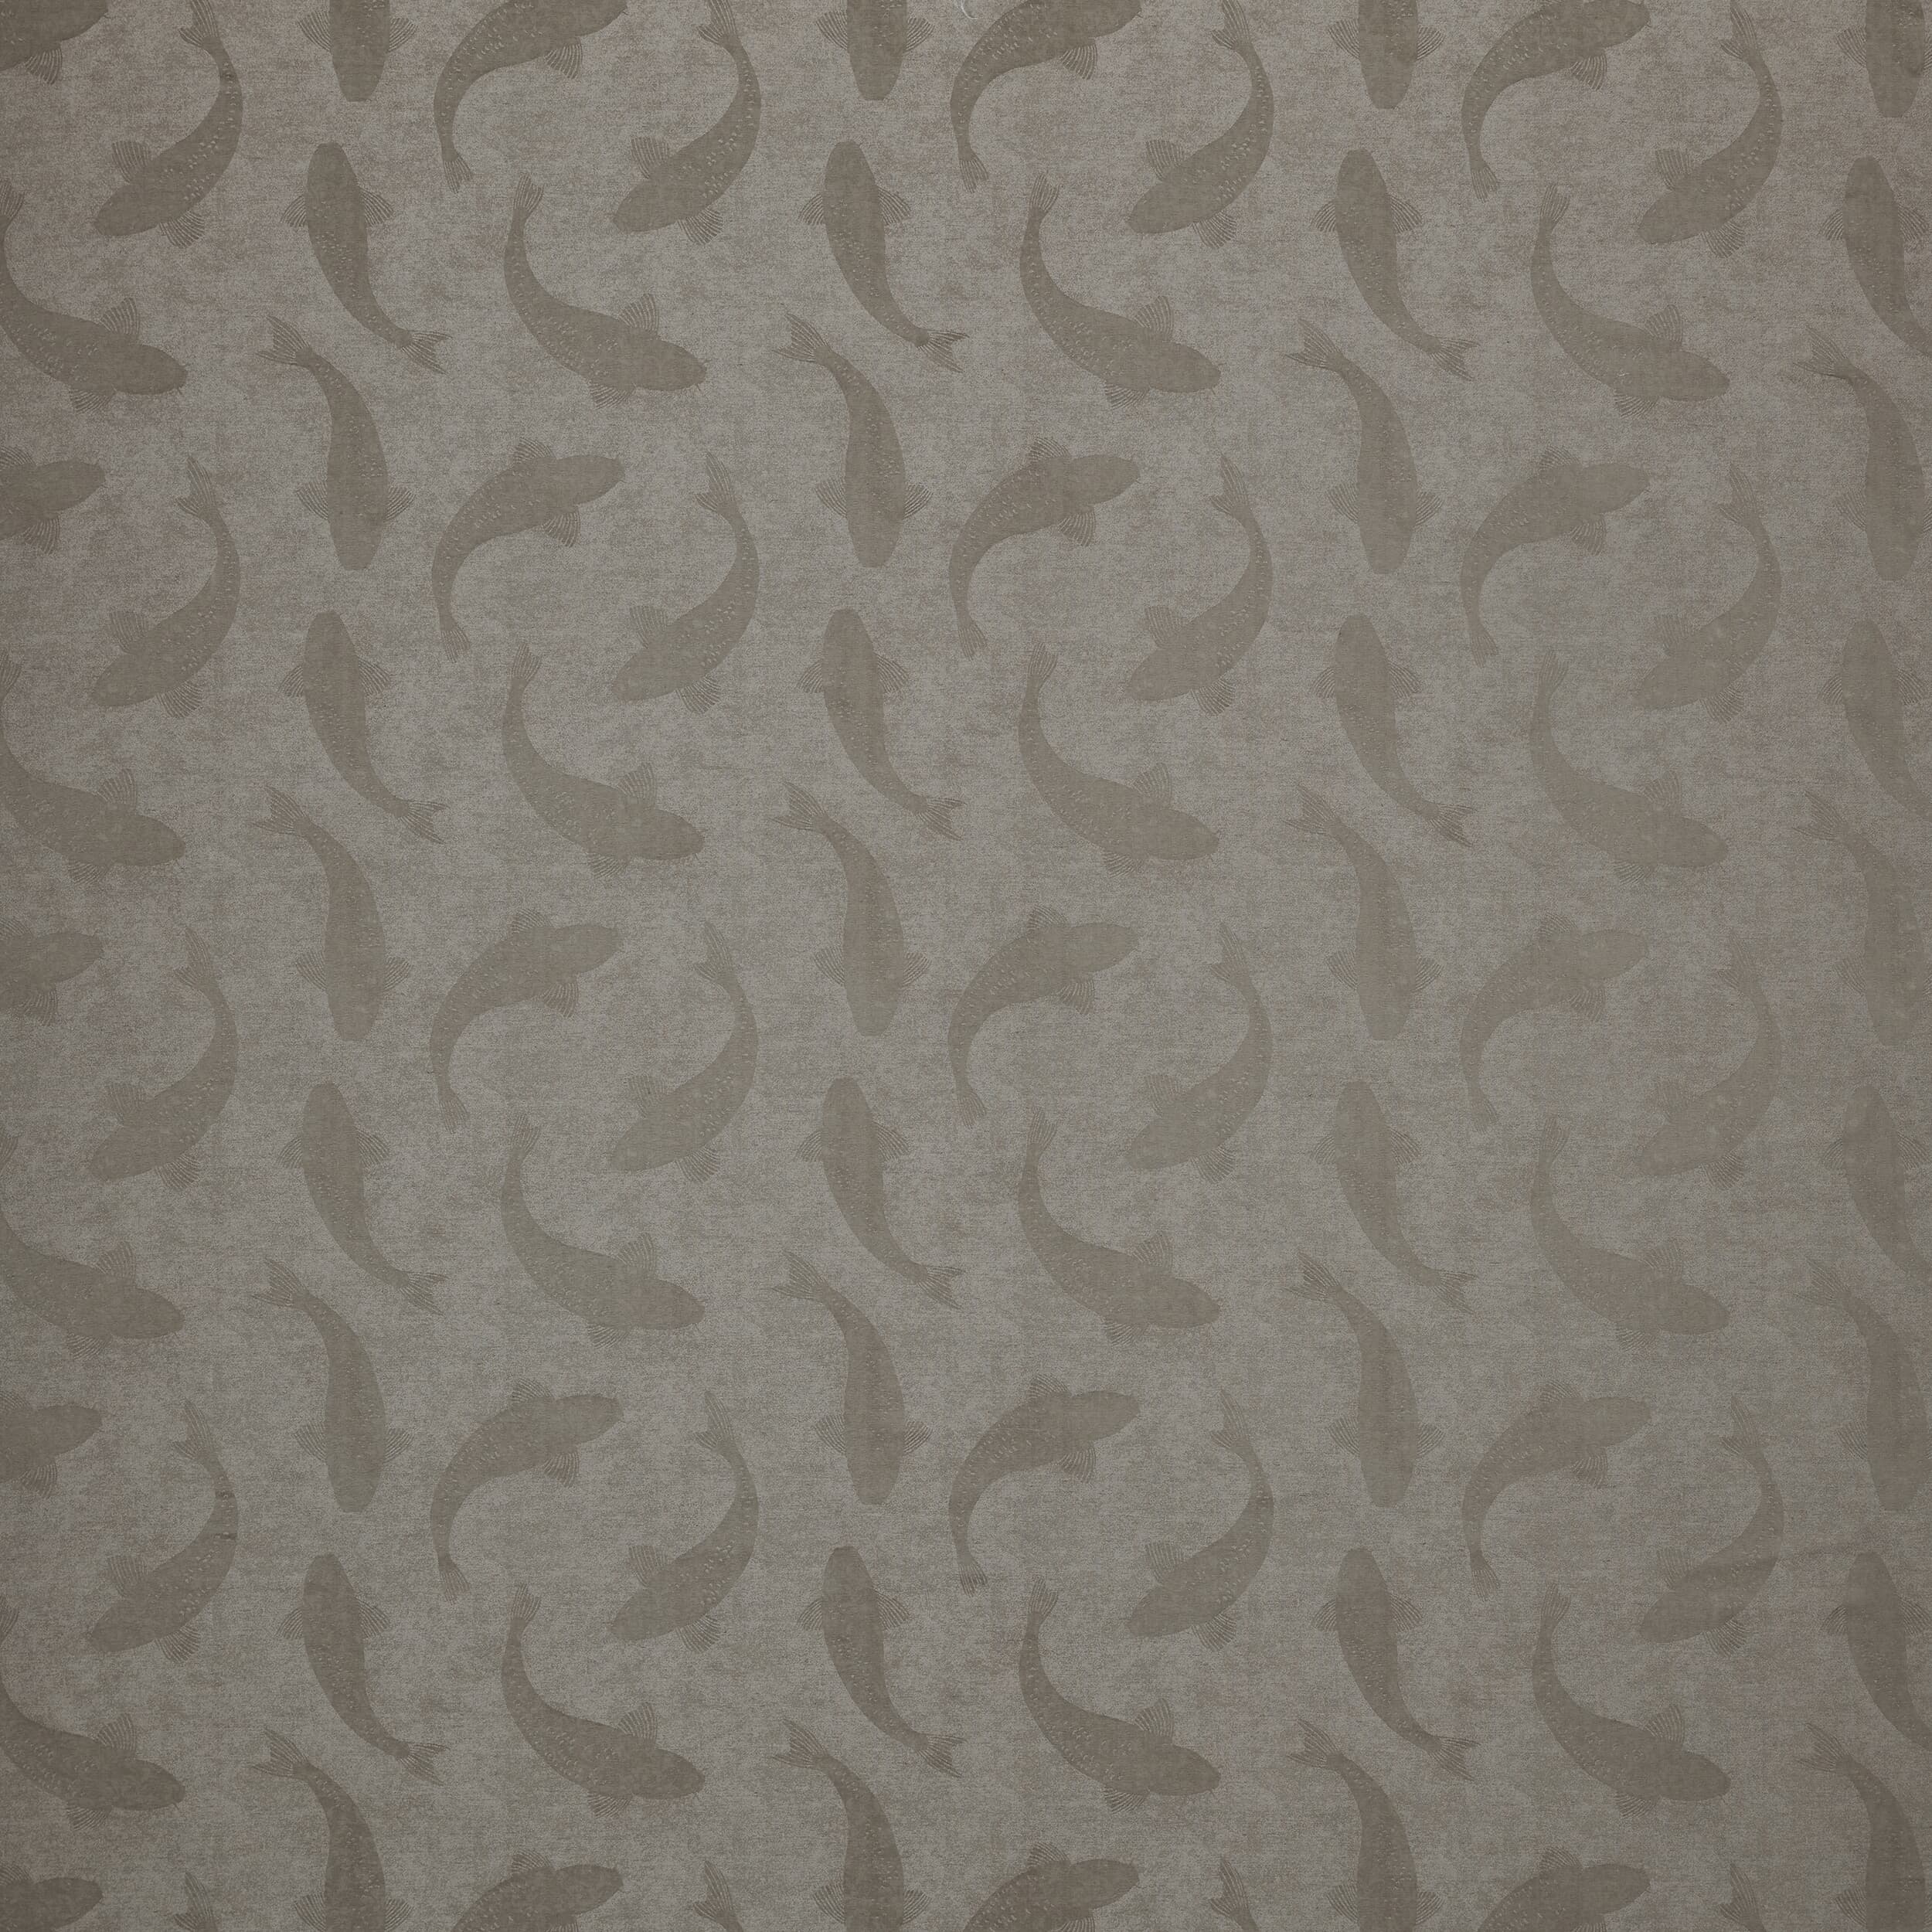 Eakins 3 Sandstone by Stout Fabric